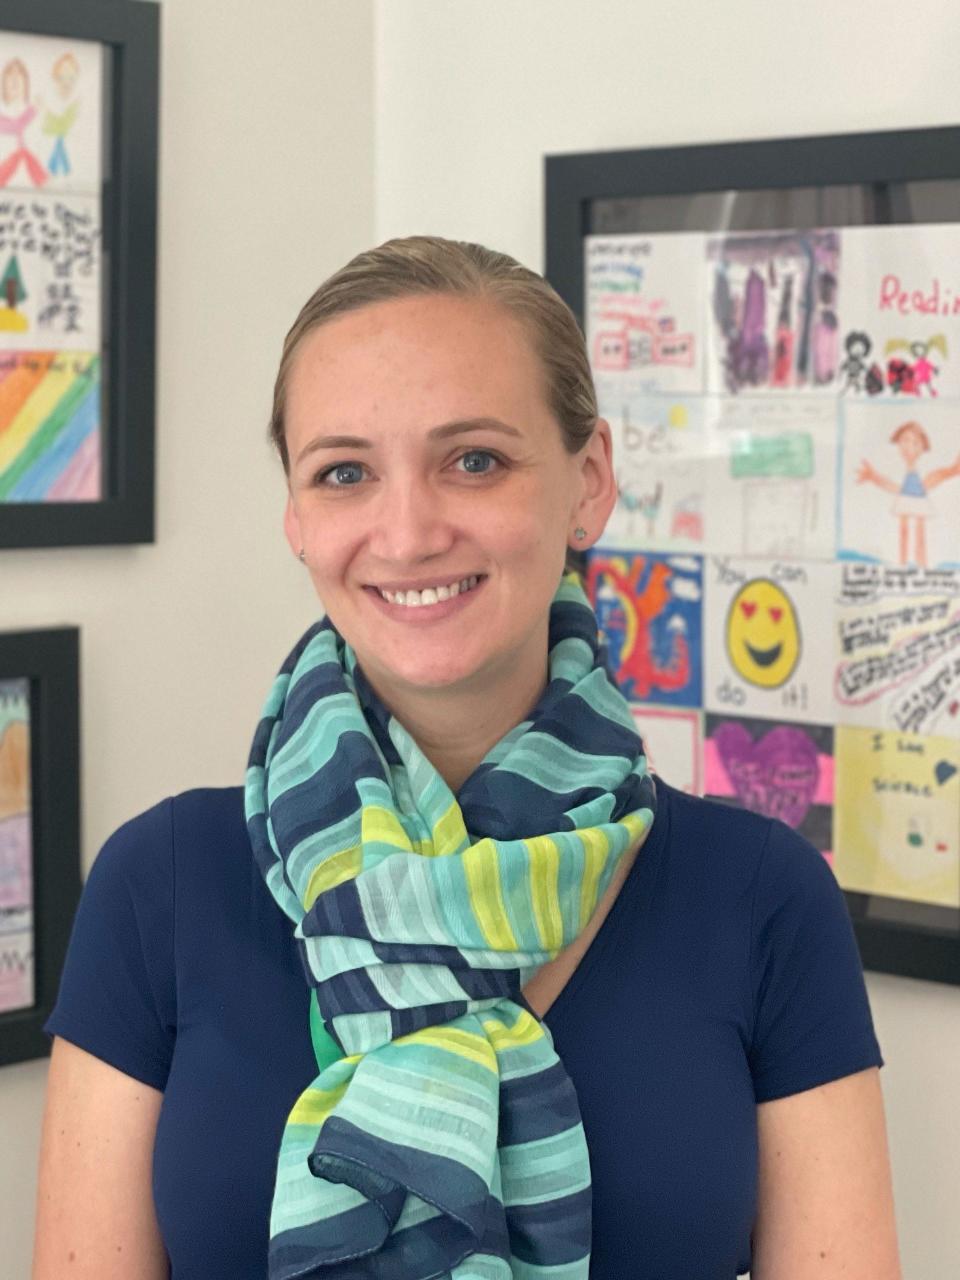 Brittany Granfield, dean of students at the Frances G. Hopkins School at Horne Street in Dover, will be the next principal of the school. Current school principal Patricia Driscoll is retiring at the end of the academic year.